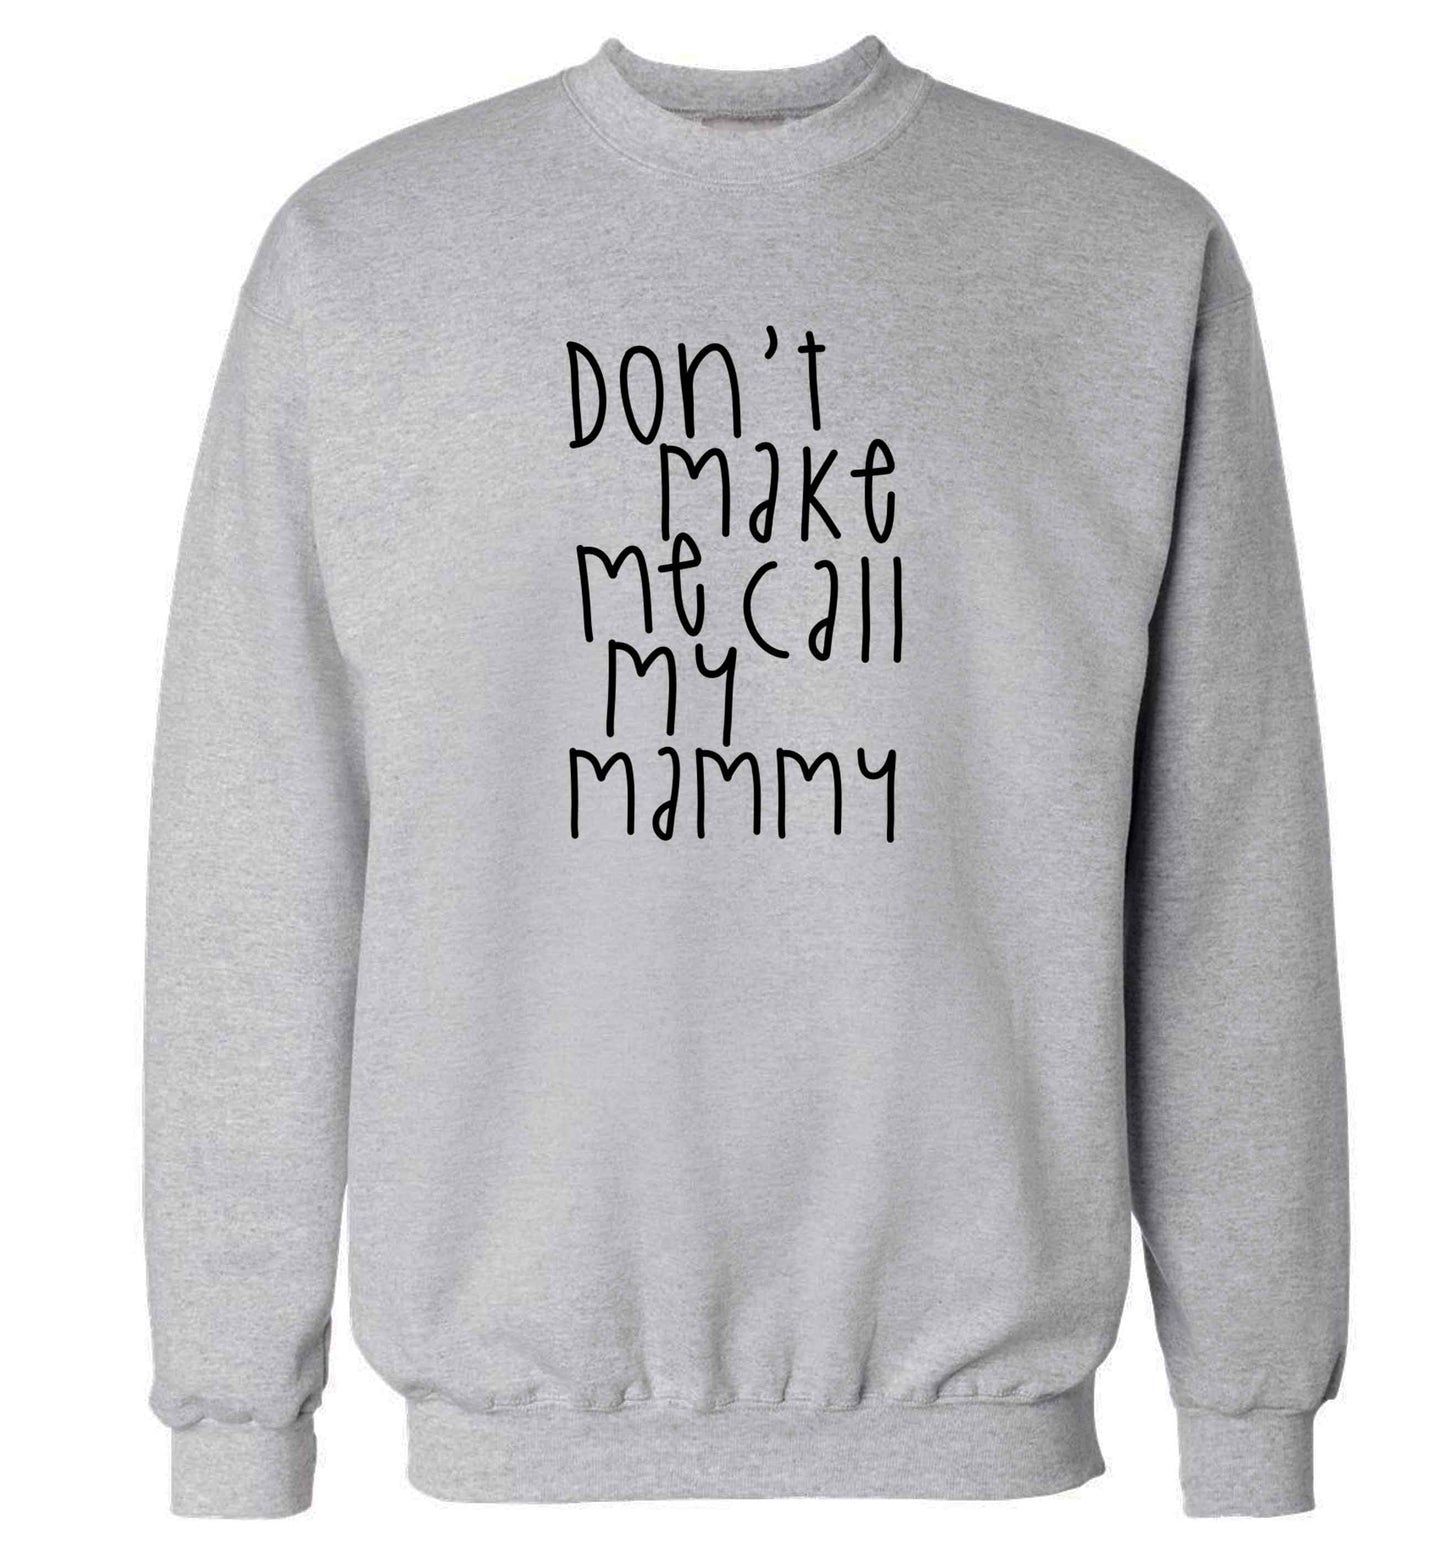 Don't make me call my mammy adult's unisex grey sweater 2XL